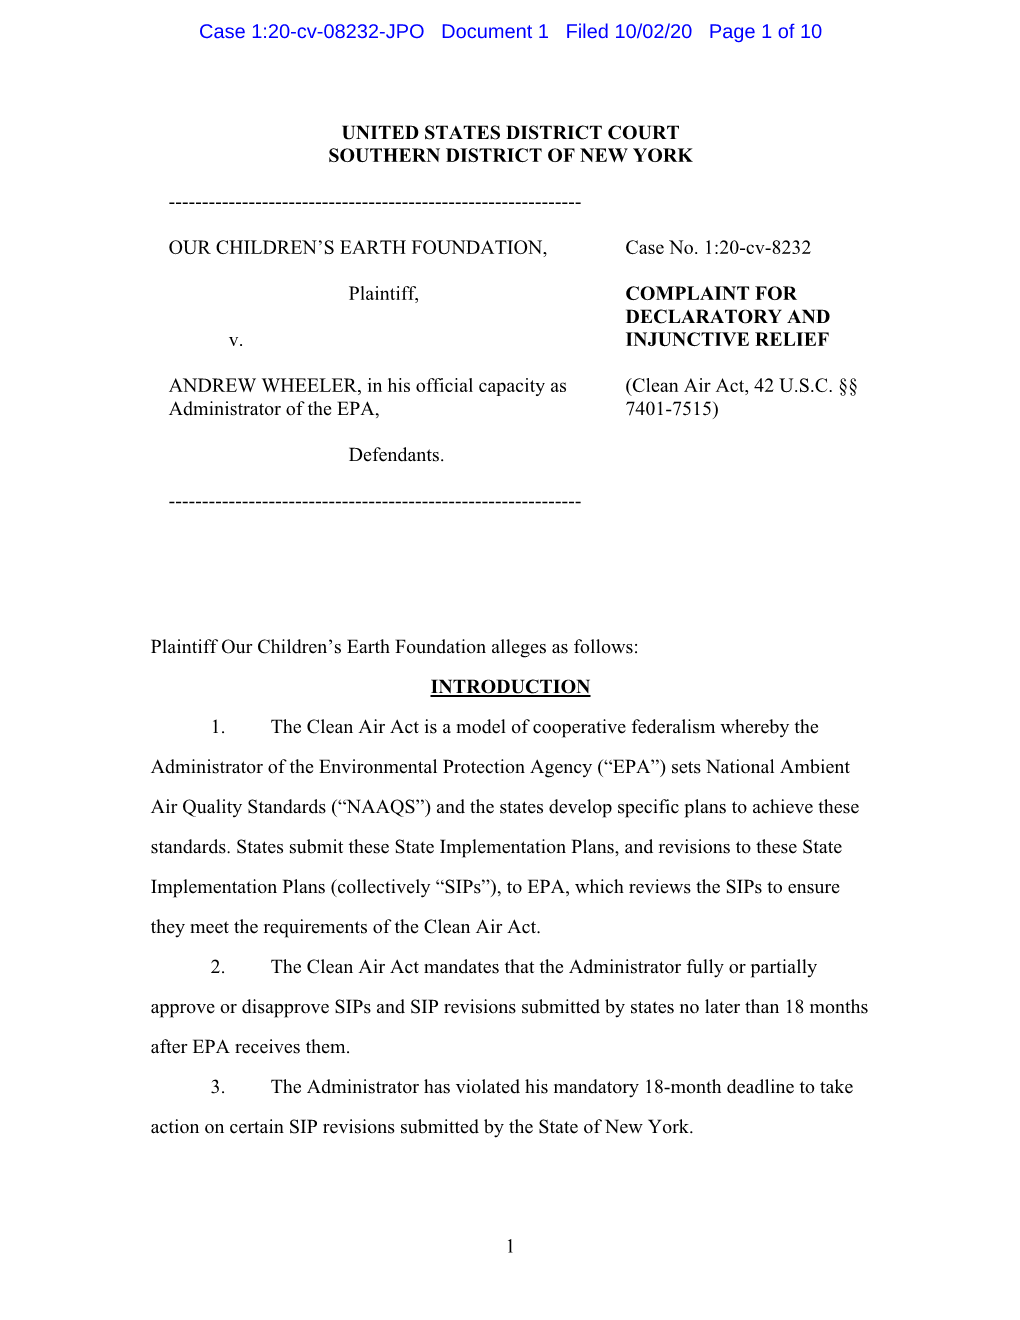 Case 1:20-Cv-08232-JPO Document 1 Filed 10/02/20 Page 1 of 10